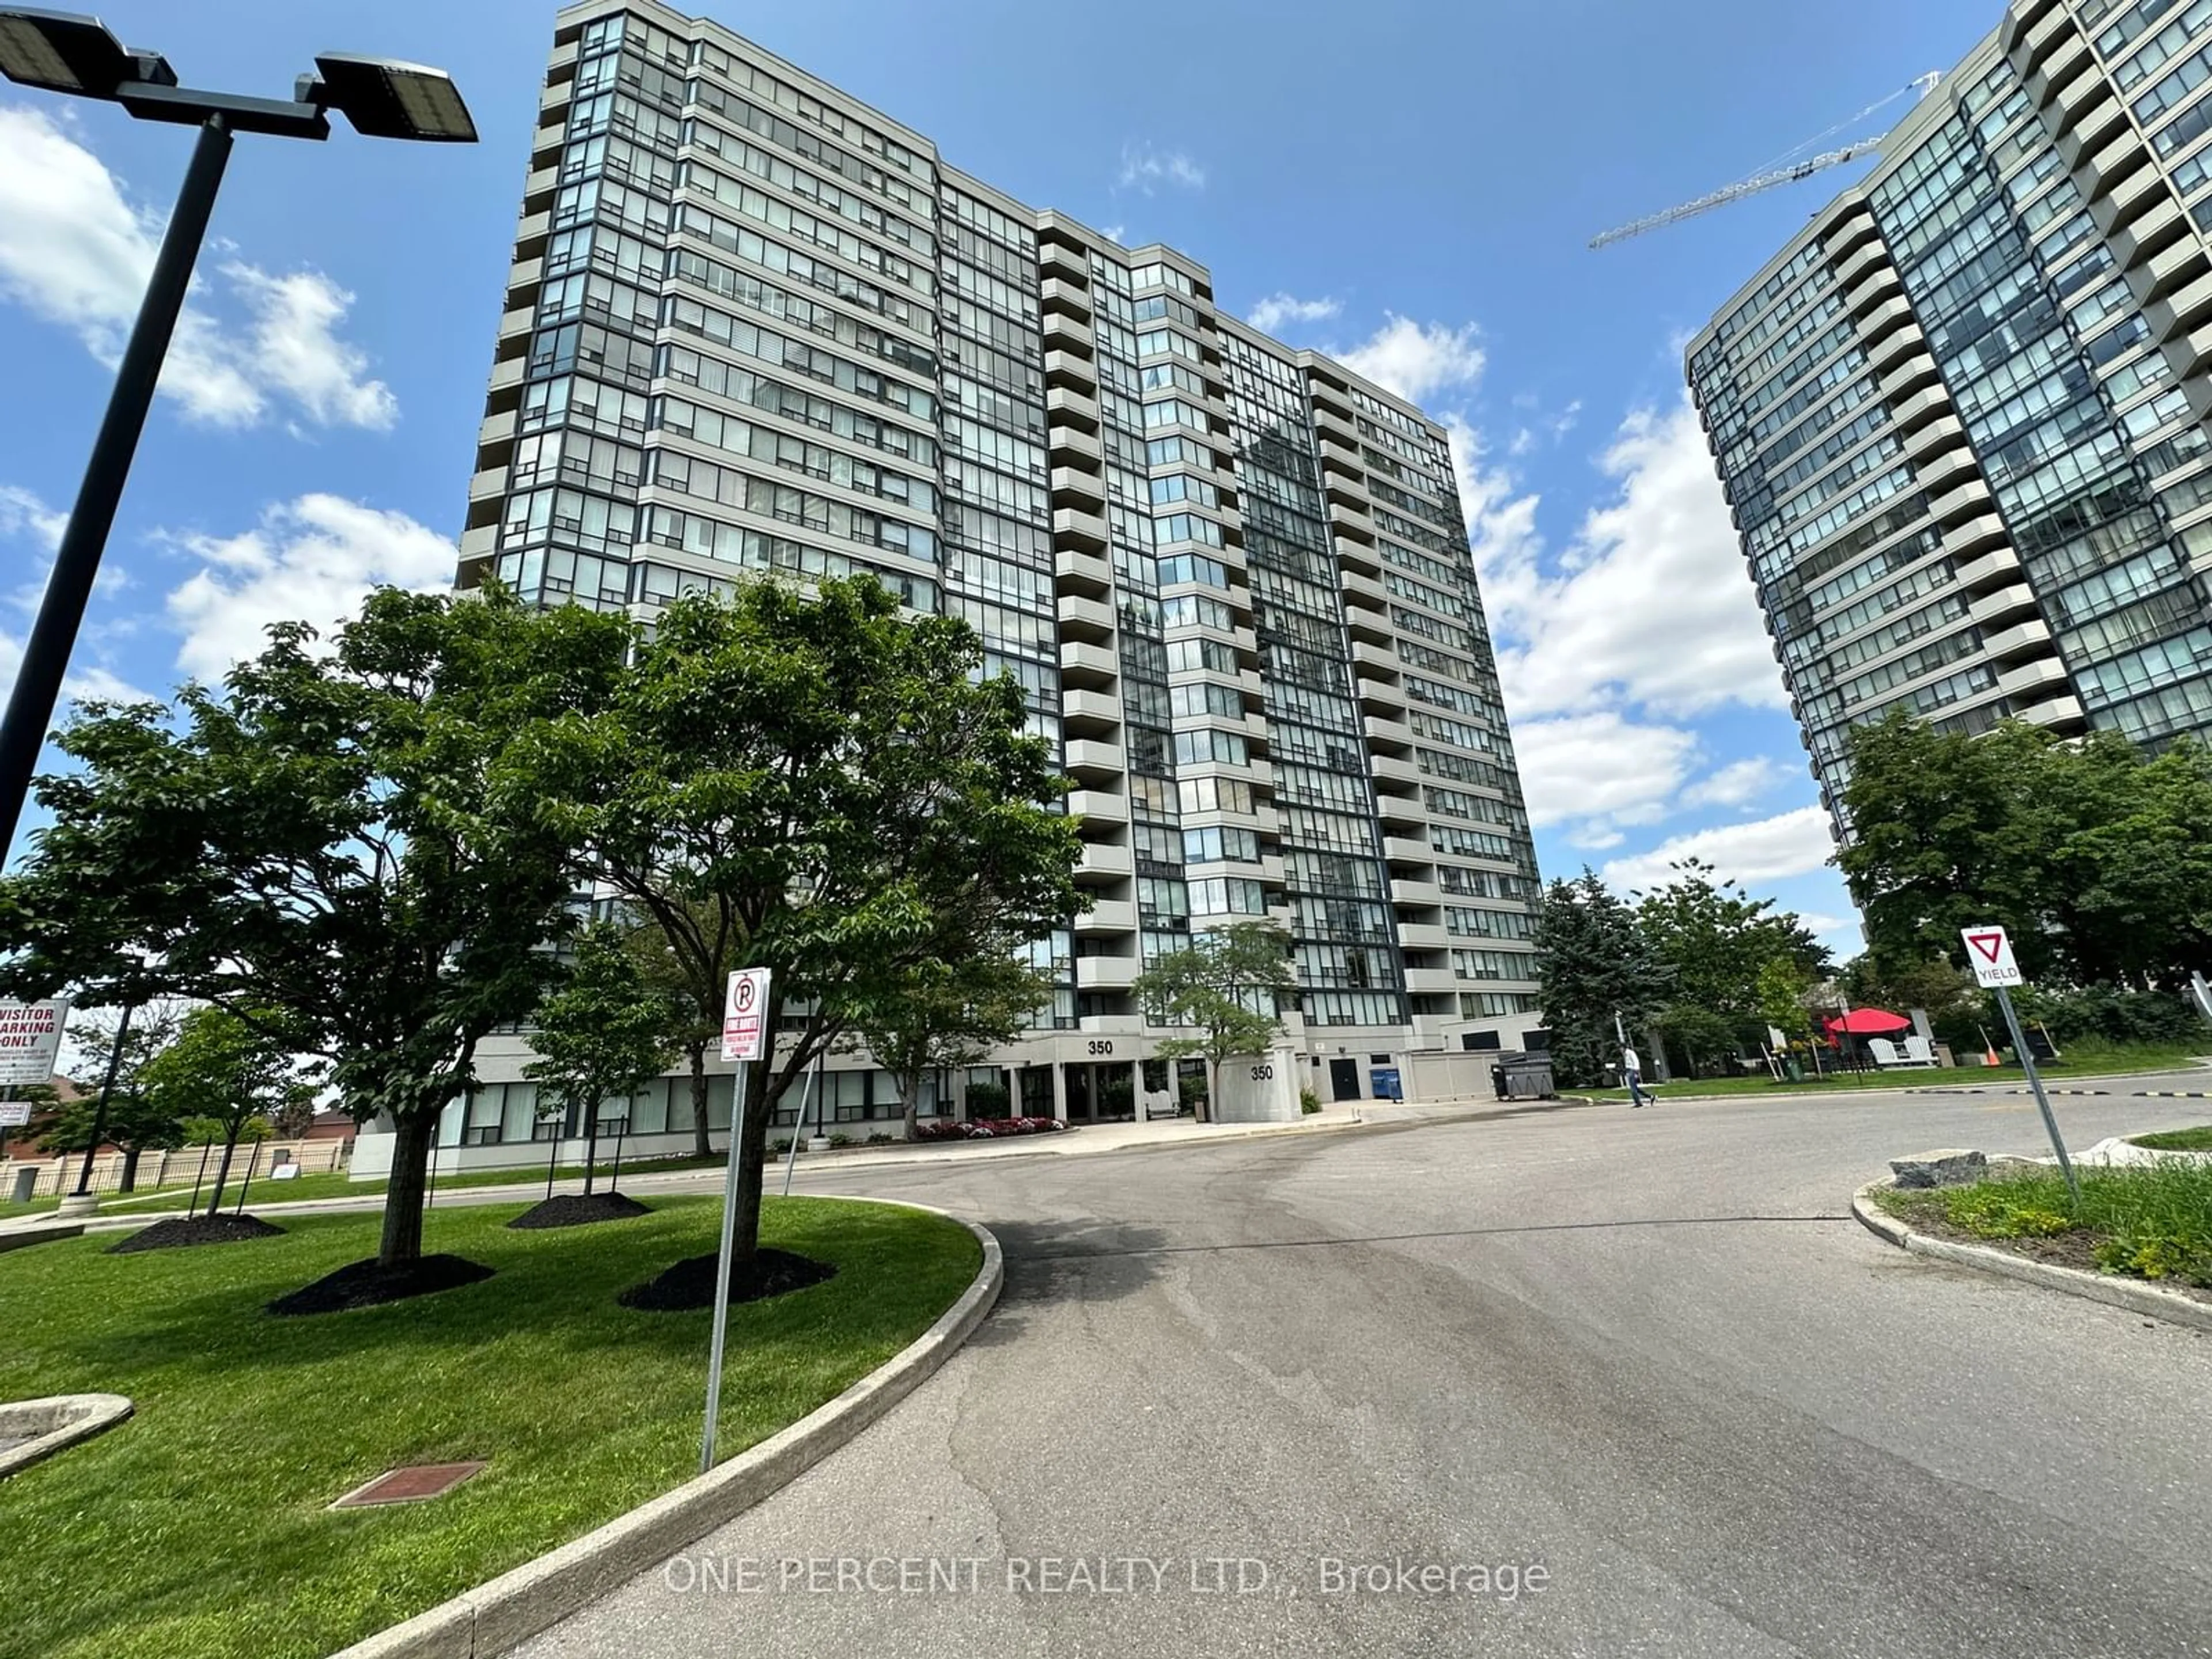 A pic from exterior of the house or condo for 350 Rathburn Rd #208, Mississauga Ontario L5B 3Y2